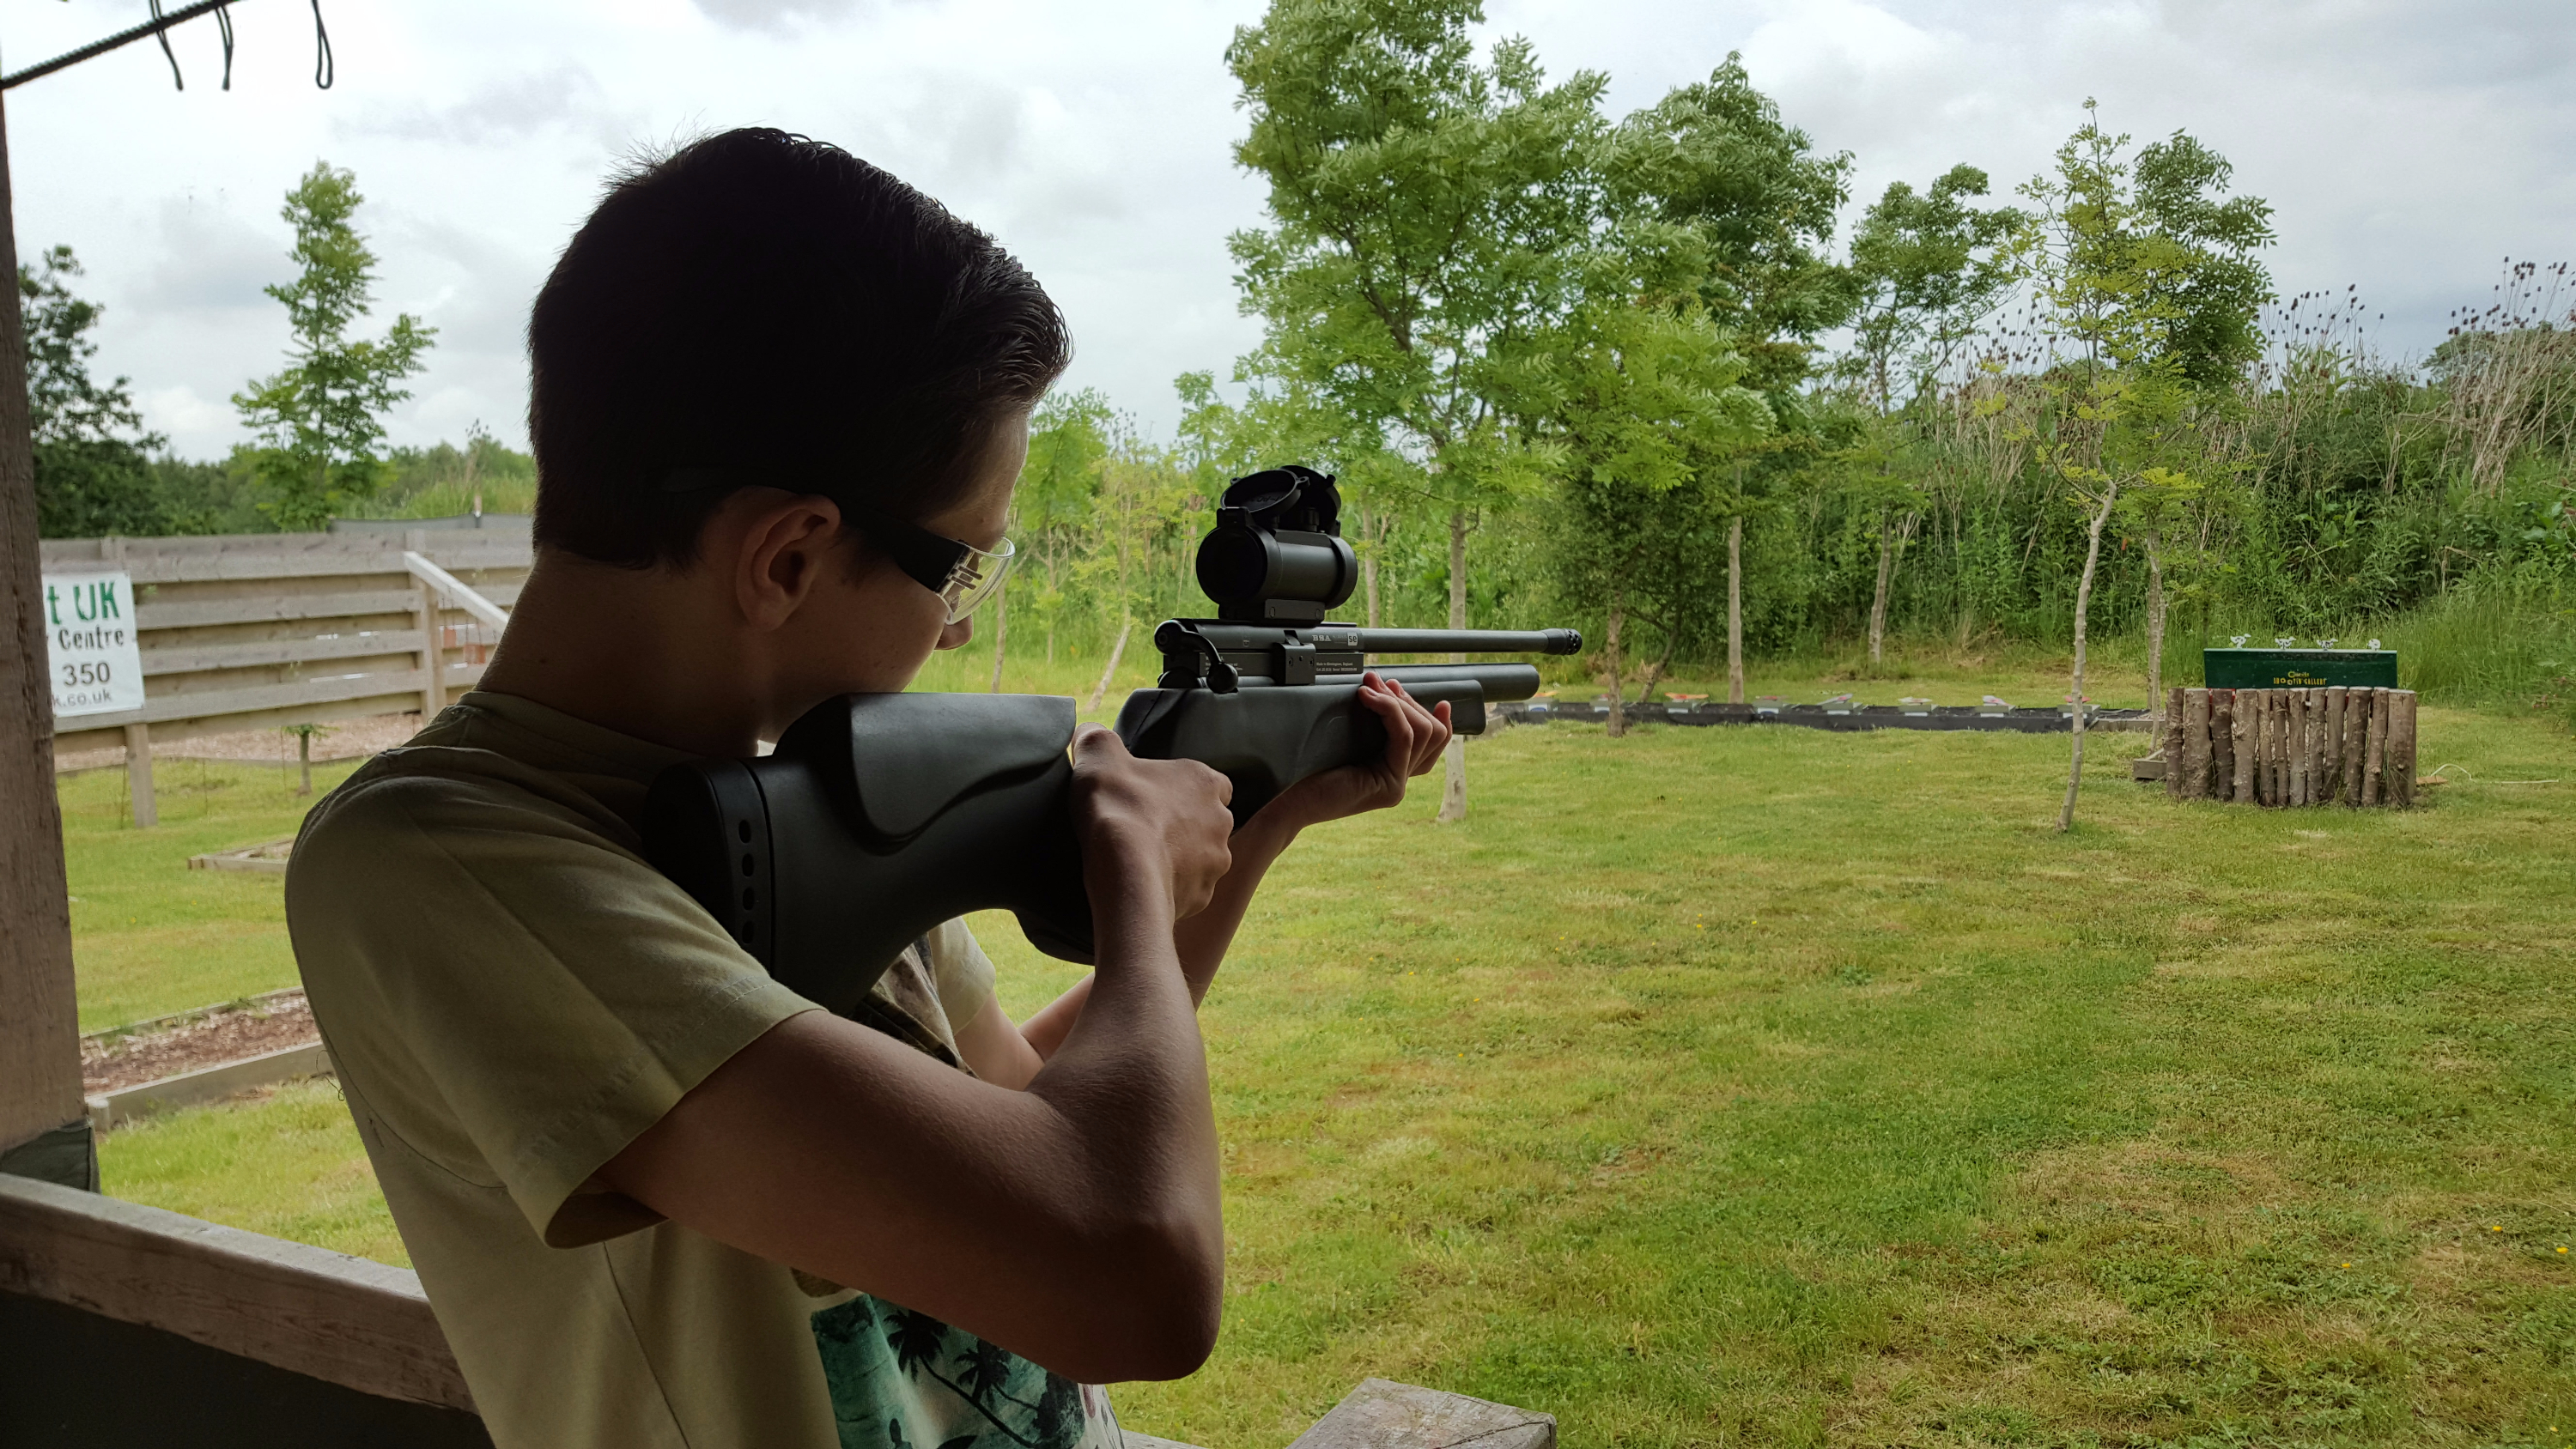 Moving Target Air Rifle Shooting Experience - Field Sport UK